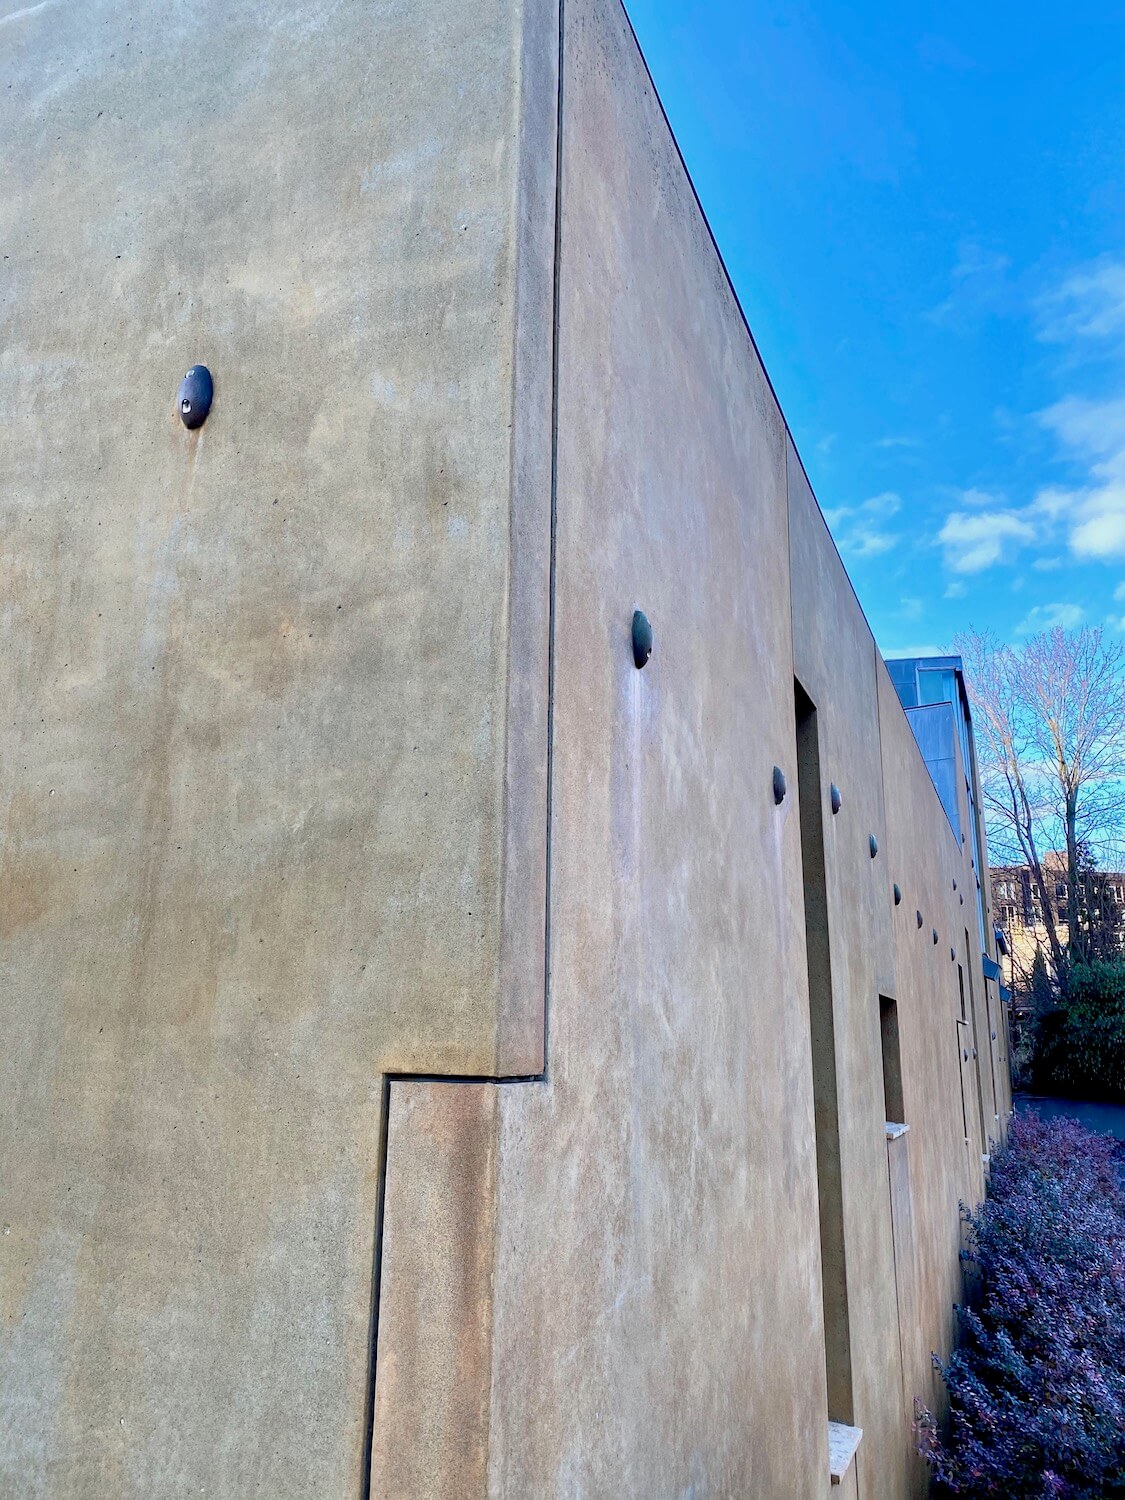 An interesting corner of the Chapel of St. Ignatius offers a angled perspective of the novel church design.  The walls are a concrete finish made to look like stucco found in the SW United States.  